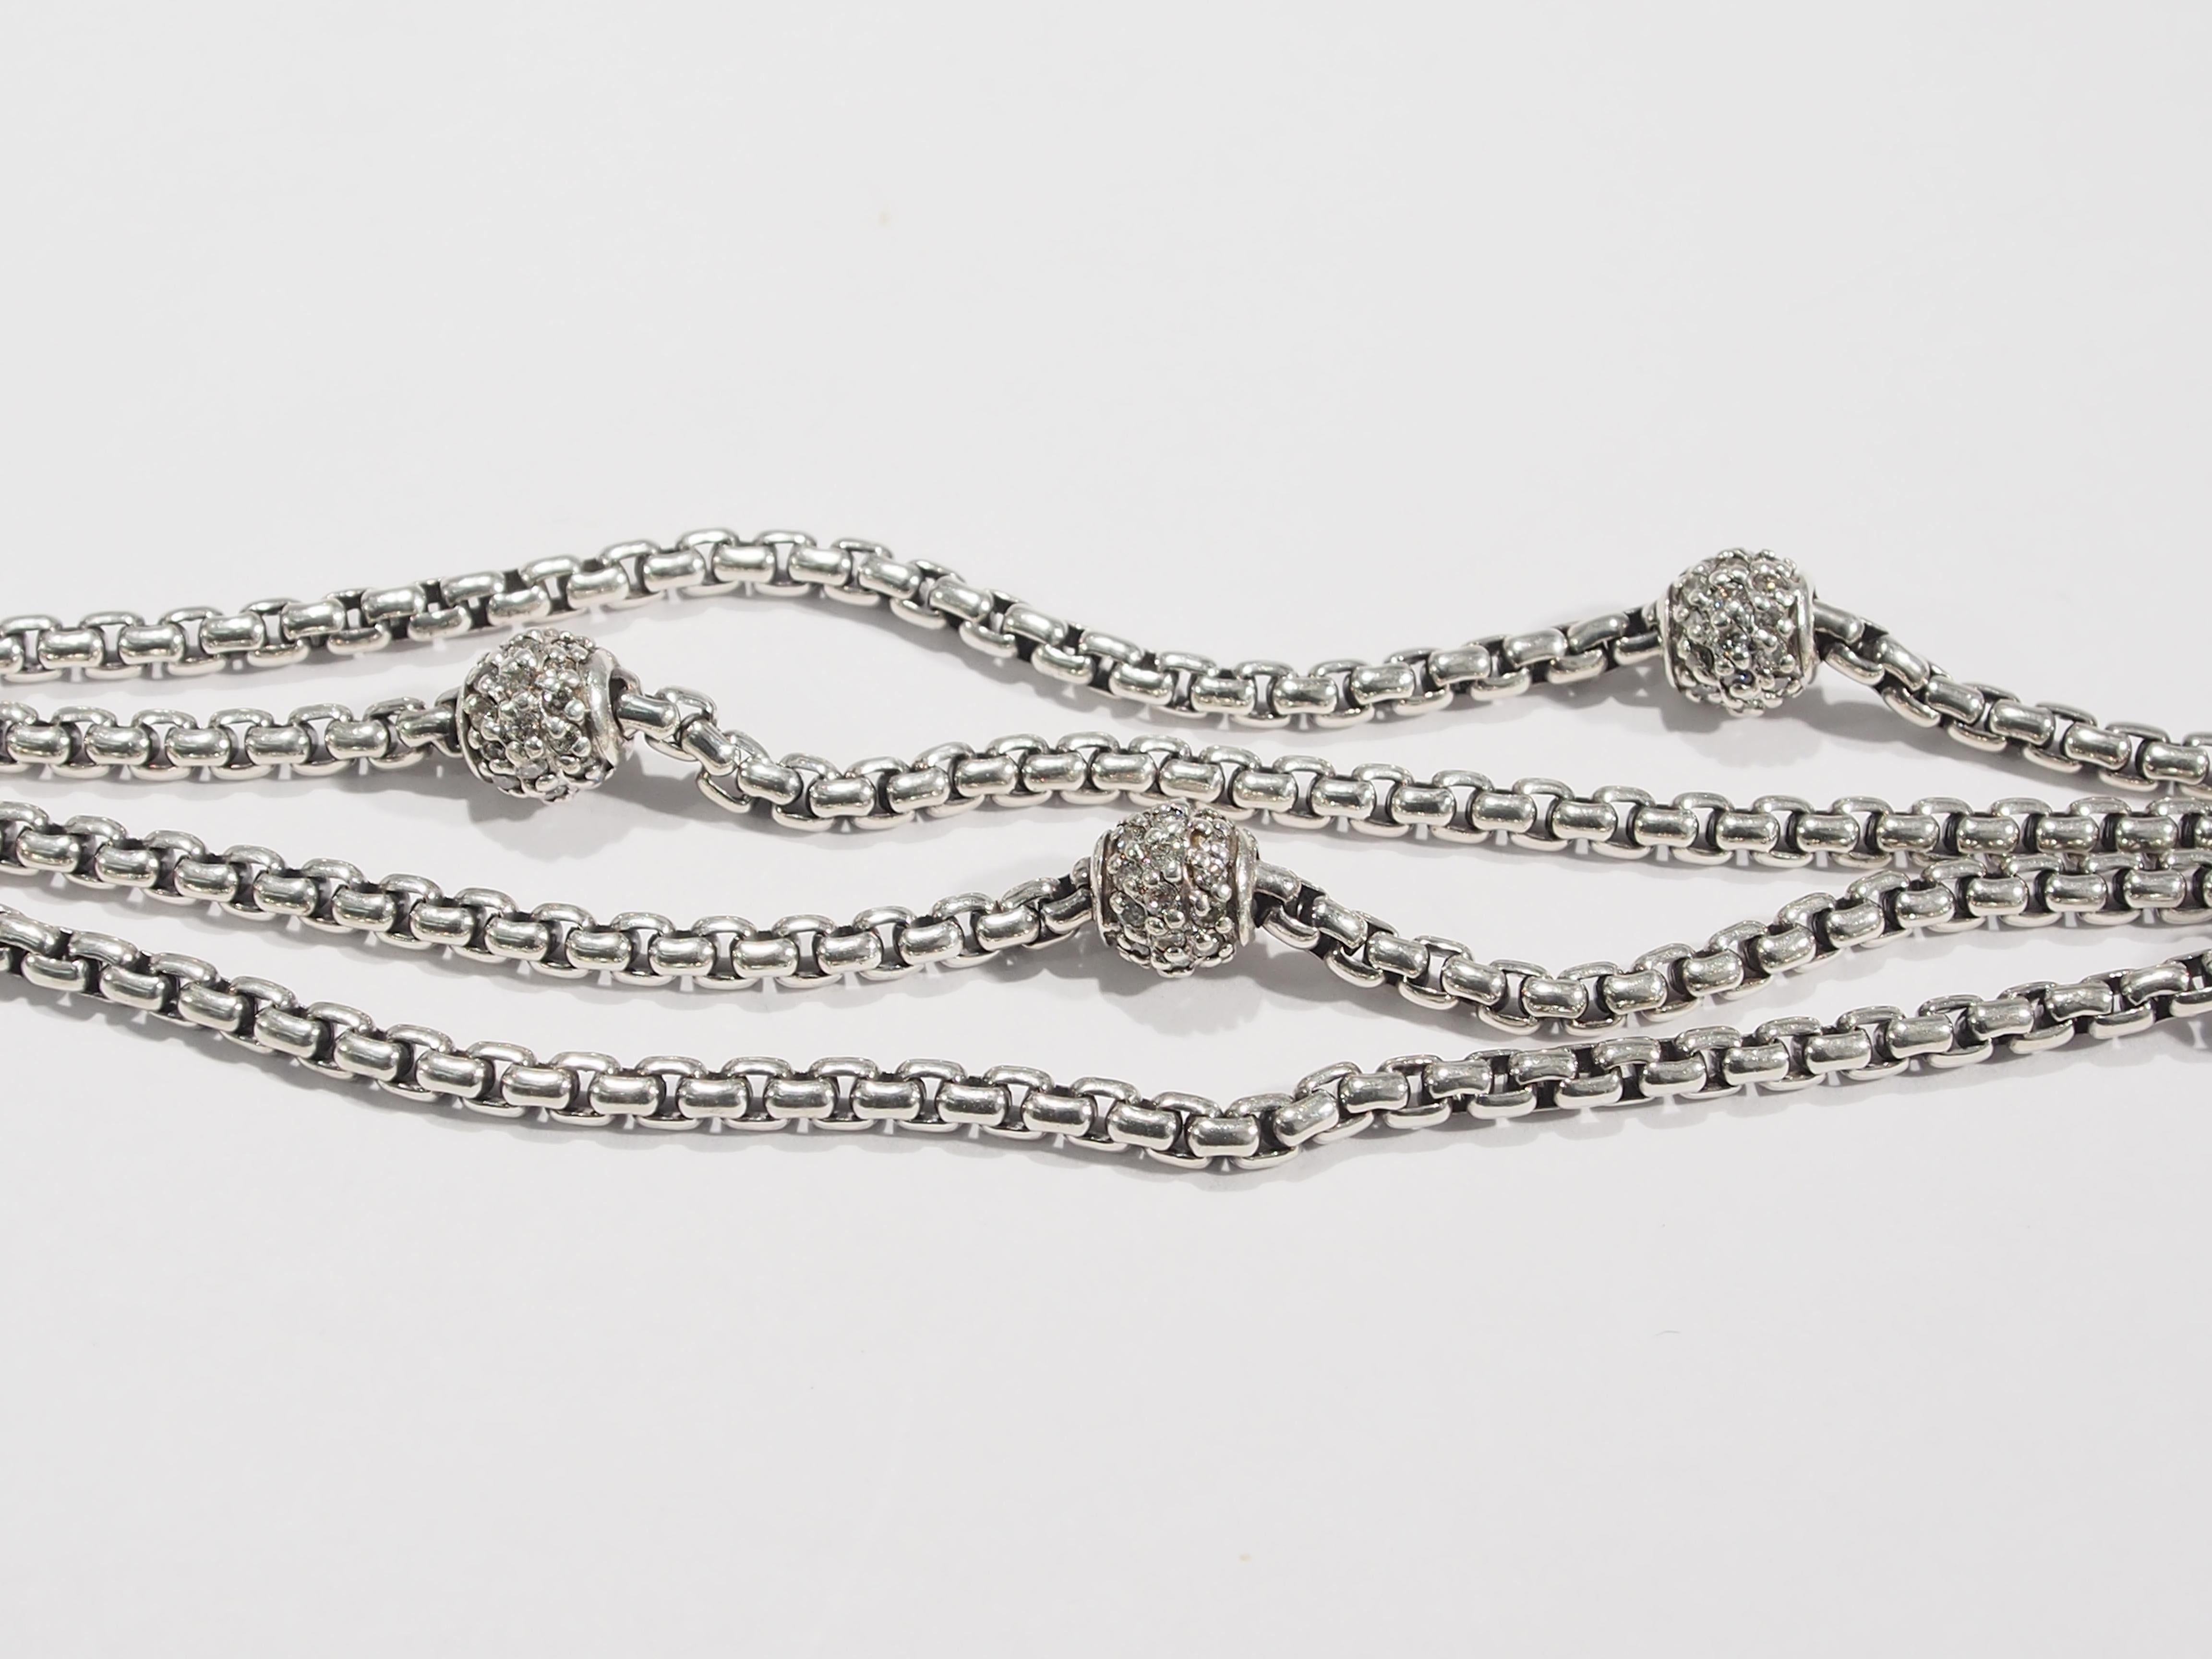 From one of America's favorite jewelry designer, David Yurman is a stunning multi-strand Bracelet. The Bracelet has 4 Strands of his signature Sterling Silver Box Link Chain accented with 5 Pave' Beads sparkling with 165 Round Brilliant Cut